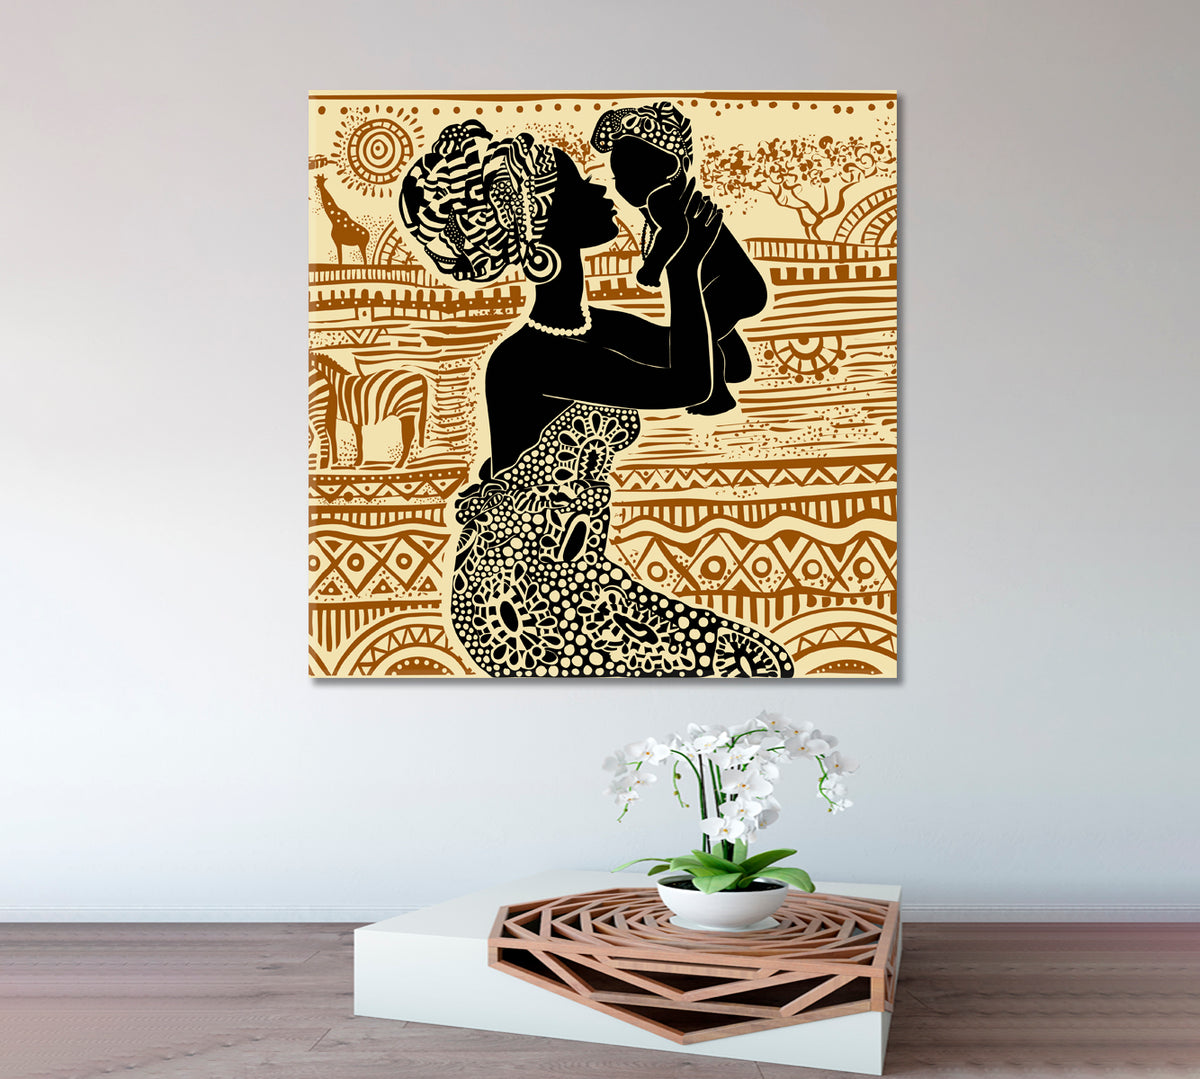 African Ethnic Retro Style, Beautiful African Black Woman With a Baby Square Panel People Portrait Wall Hangings Artesty 1 Panel 12"x12" 